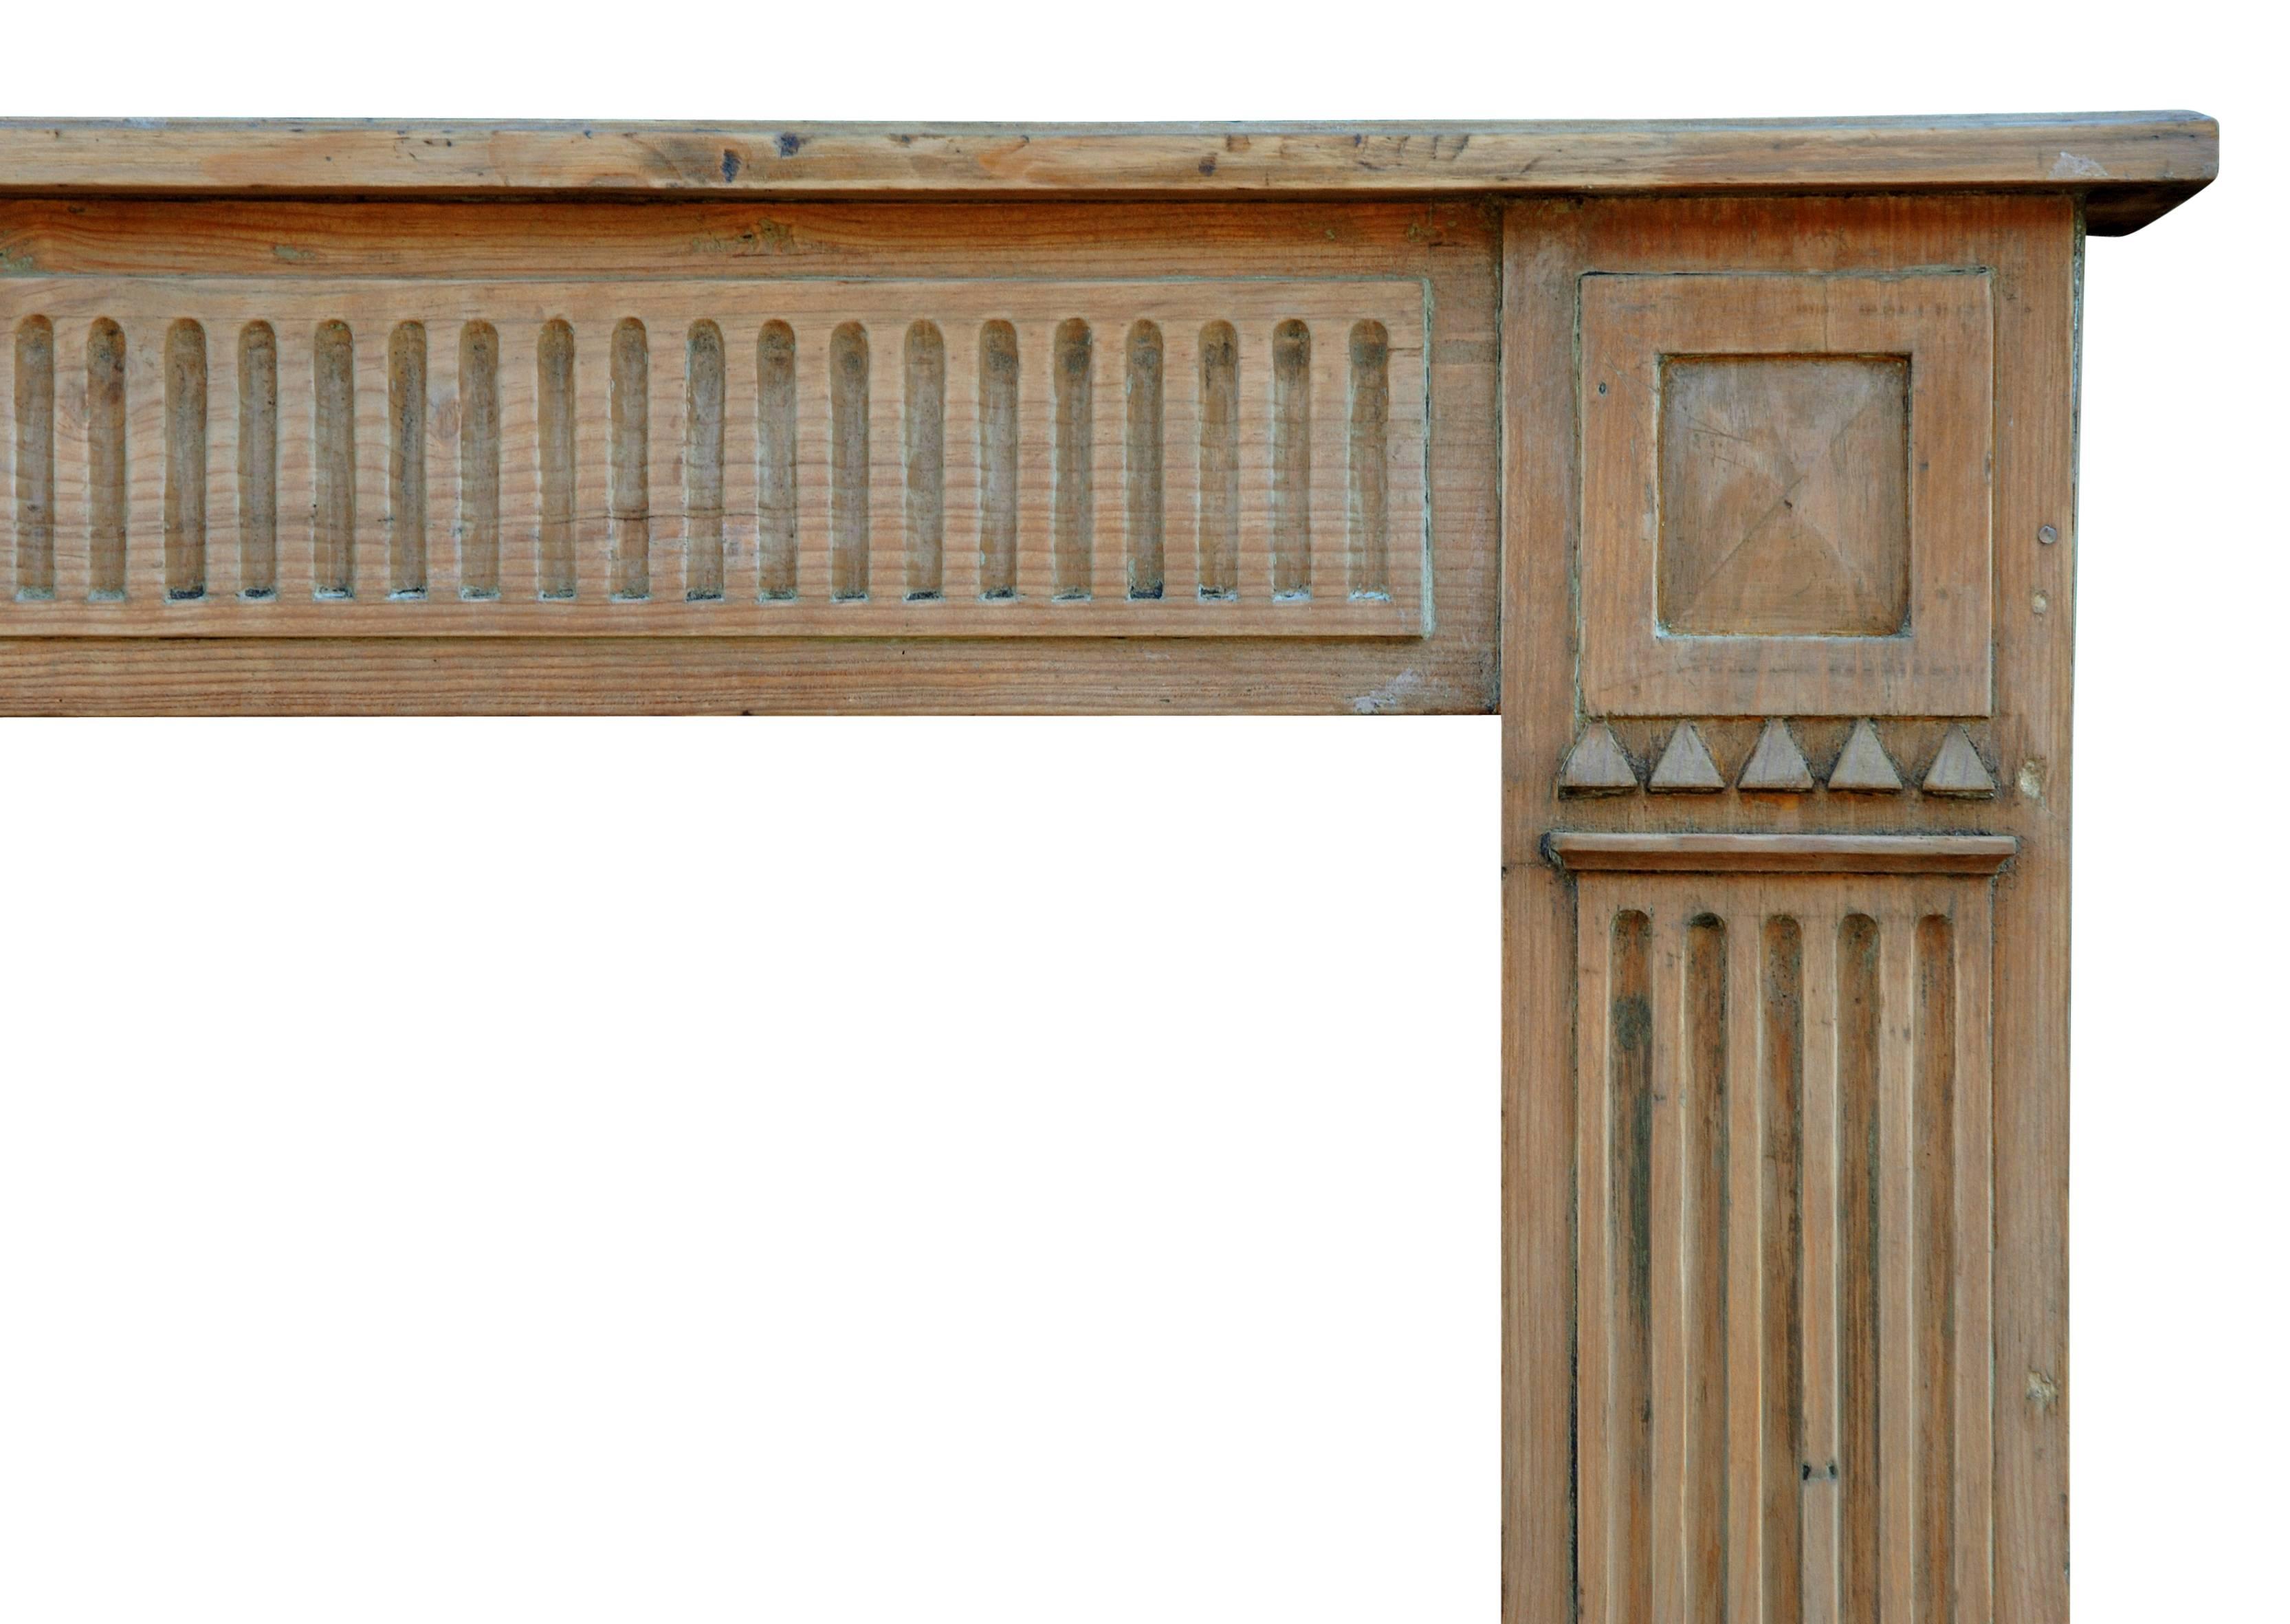 A late 18th century, French, Louis XVI pine fireplace, with fluted frieze and jambs.

Measures: Shelf width - 1537 mm 60 ½ in.
Overall height - 1118 mm 44 in.
Opening height - 933 mm 36 ¾ in.
Opening width - 1111 mm 43 ¾ in.
Depth of shelf -